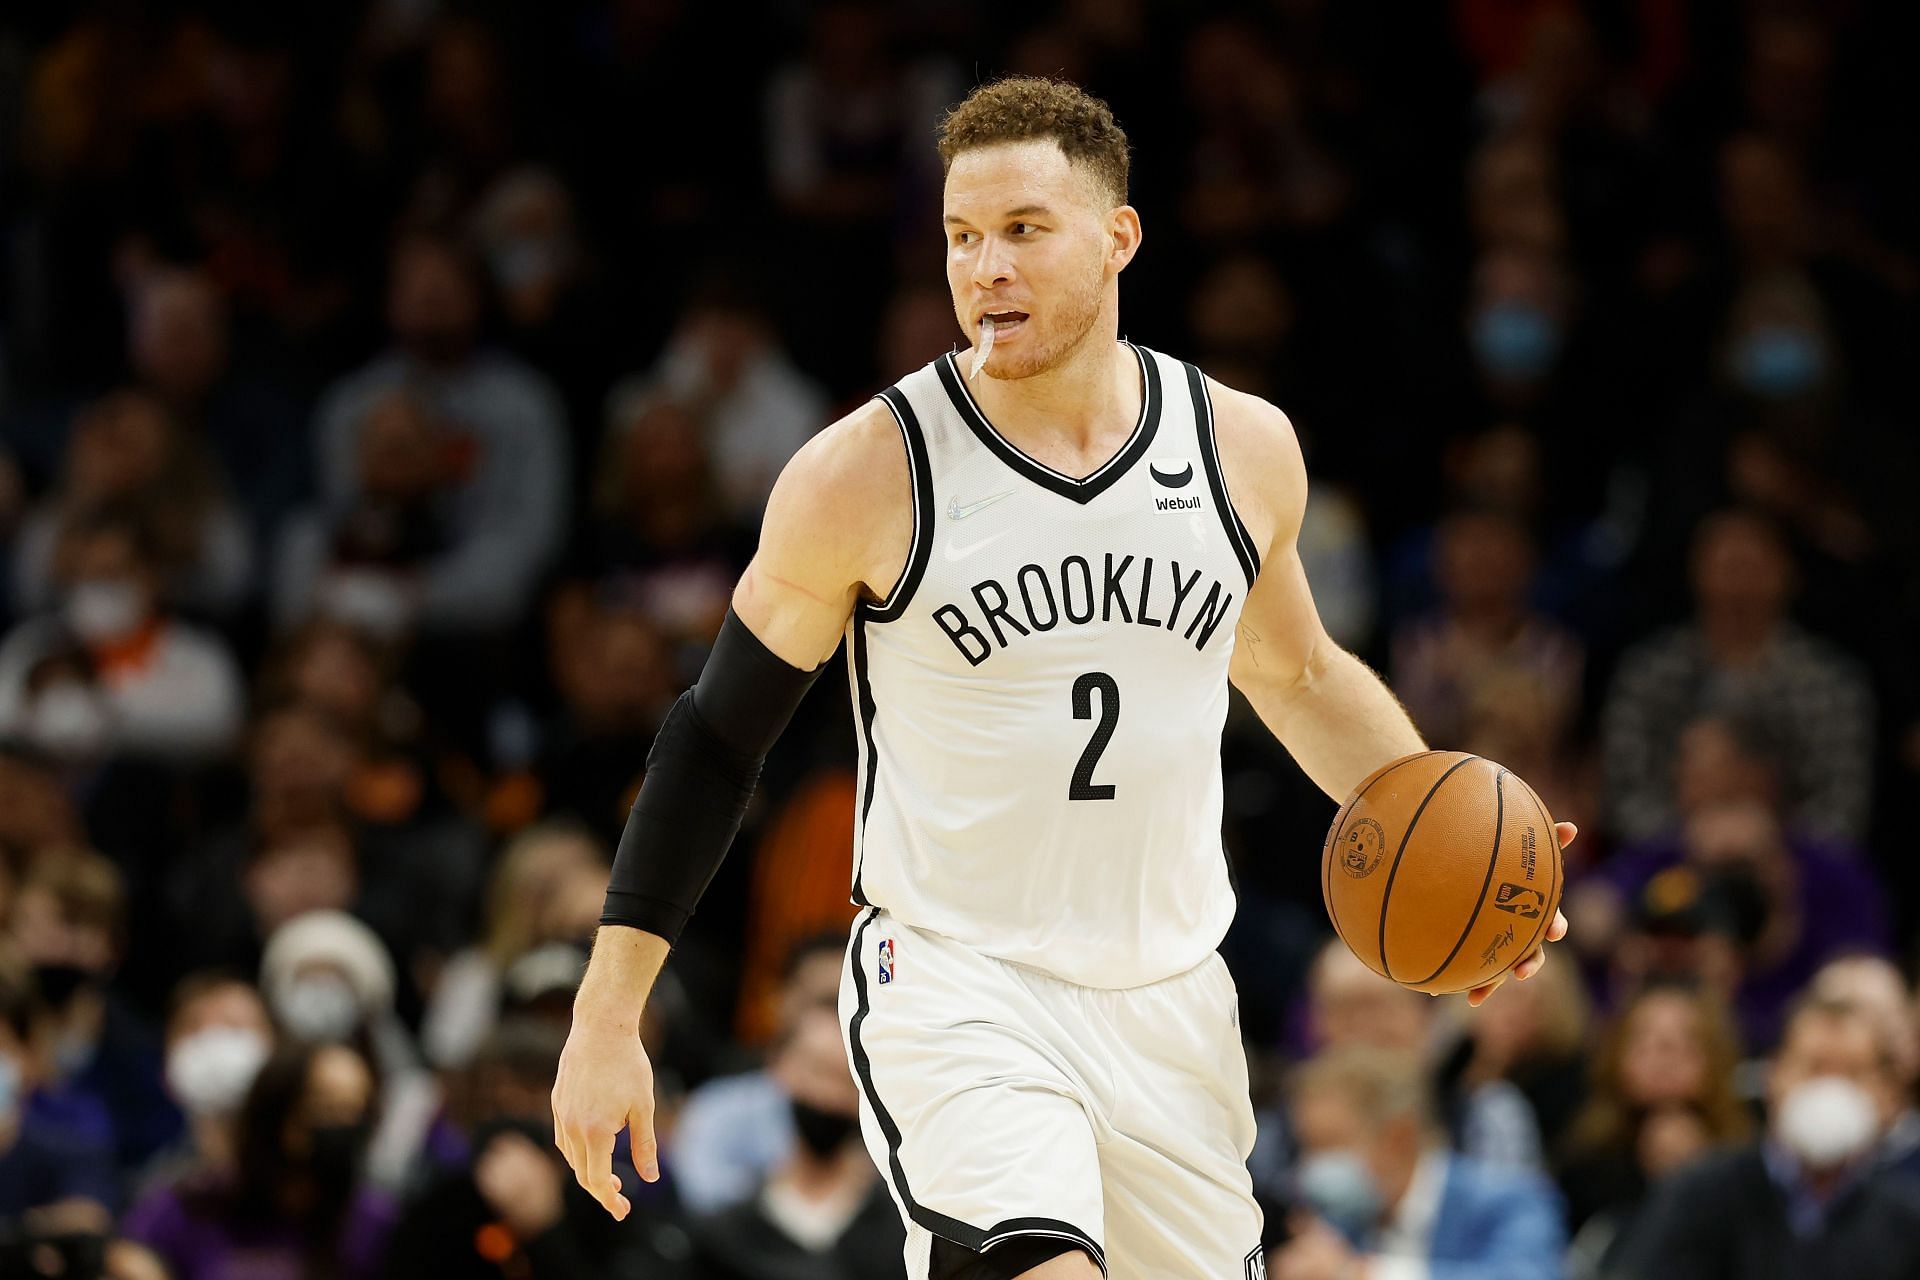 Blake Griffin with the Brooklyn Nets